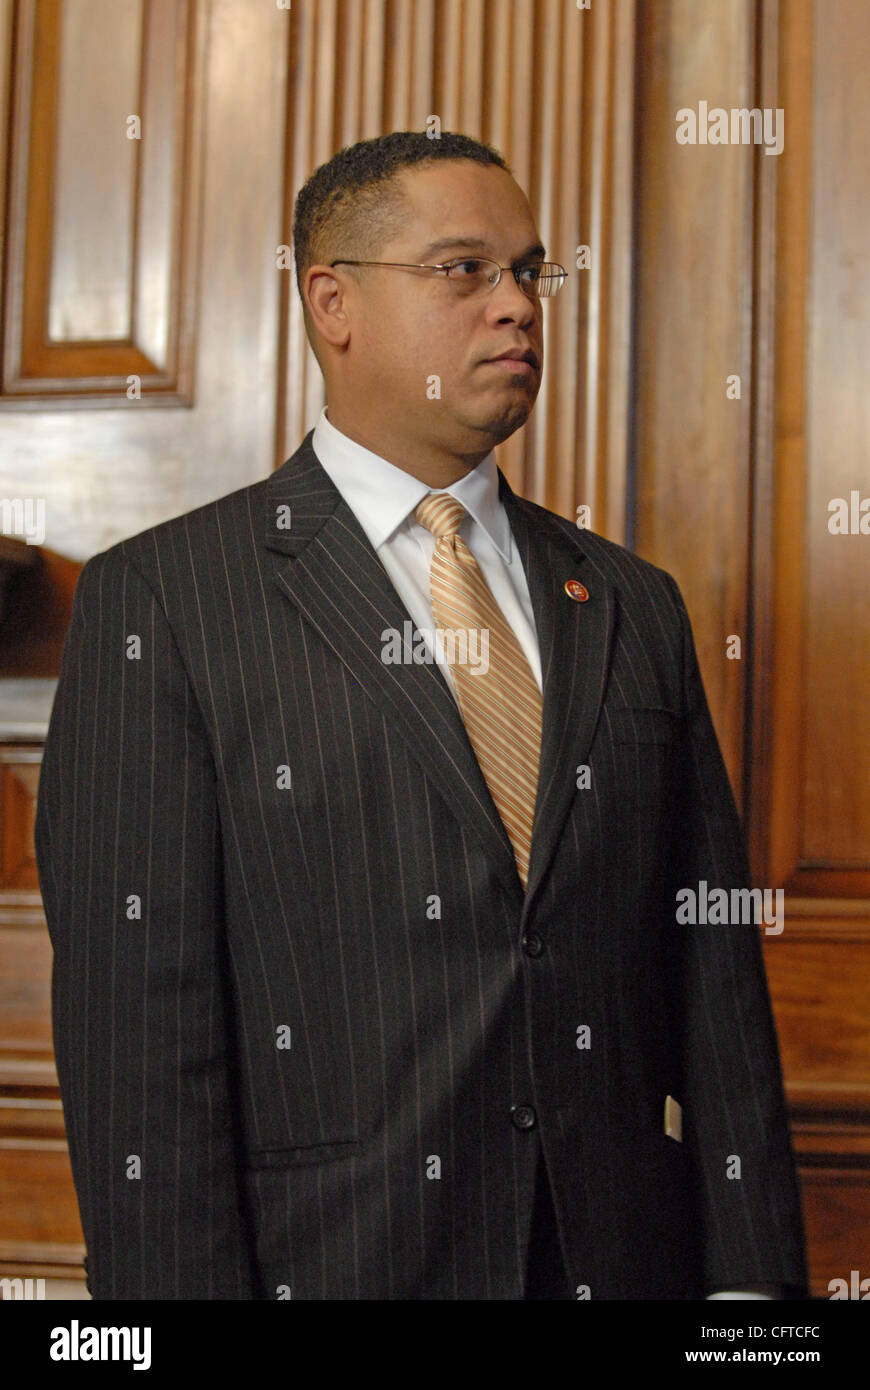 Jan 04, 2007 - Washington, DC, USA - KEITH ELLISON, the first Muslim to serve in the United States Congress, is sworn into office by Speaker of the House Nancy Pelosi. Ellison's family joined him for his swearing in ceremony. Stock Photo